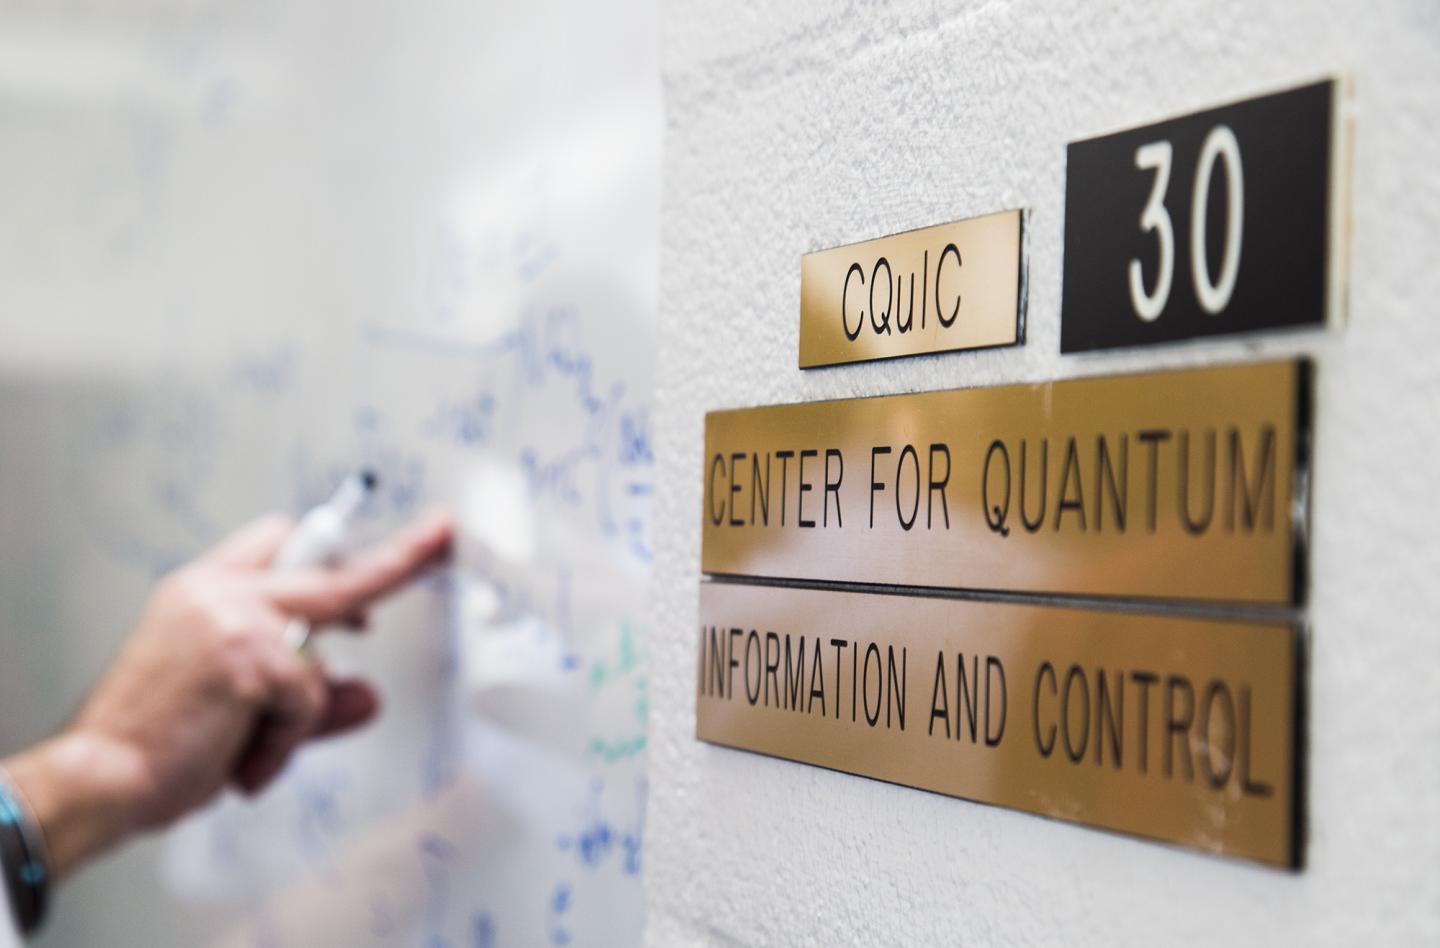 Center for Quantum Information and Control